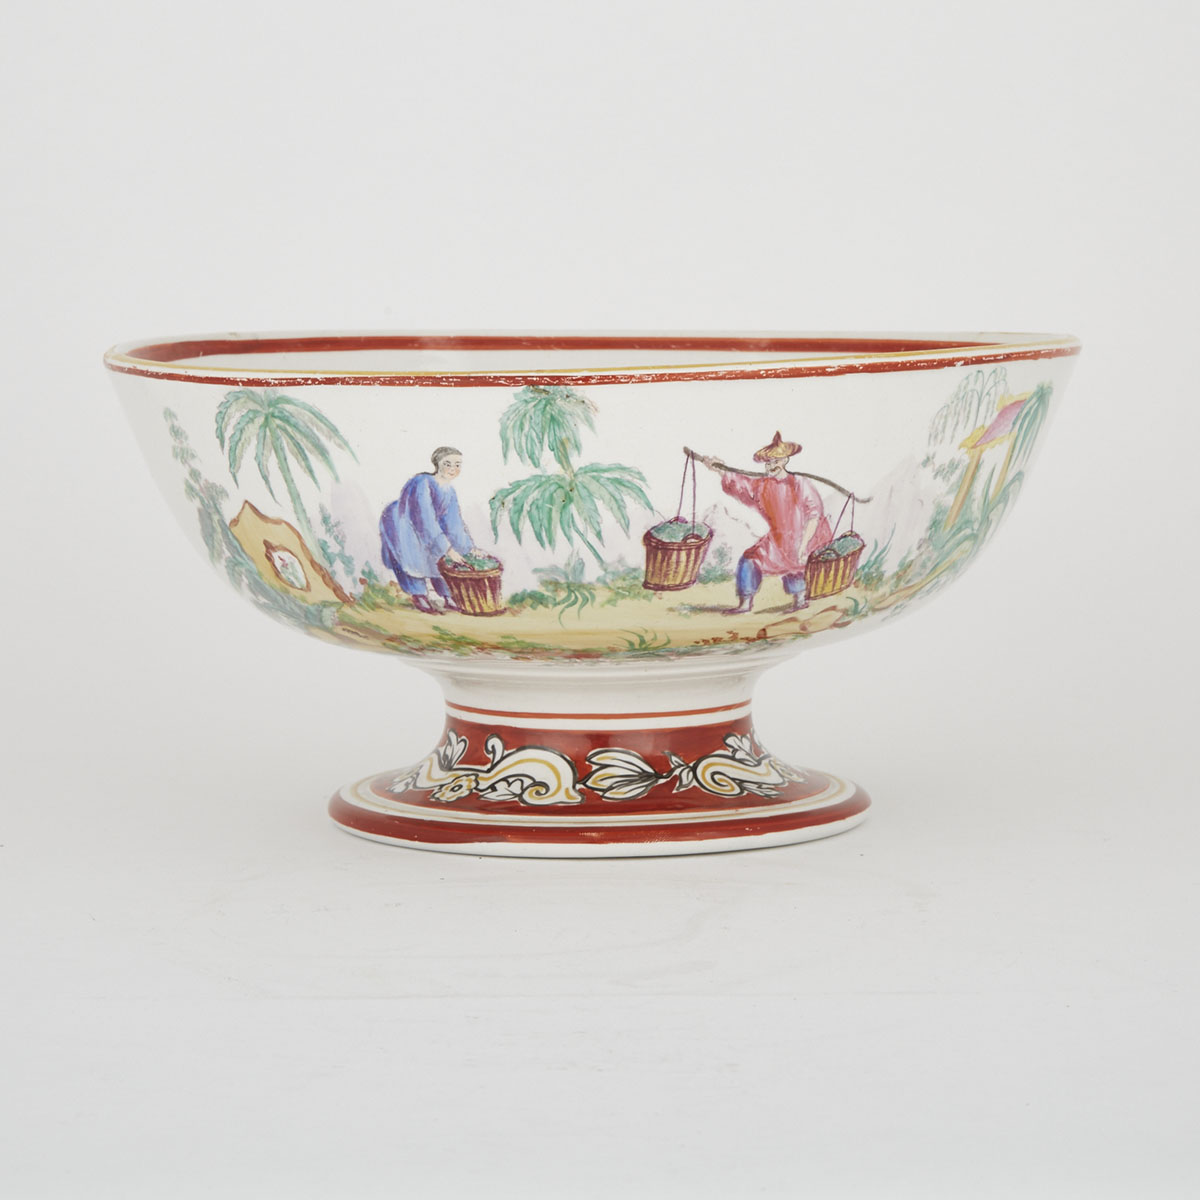 English Chinoiserie Decorated Ironstone Footed Bowl, mid-19th century